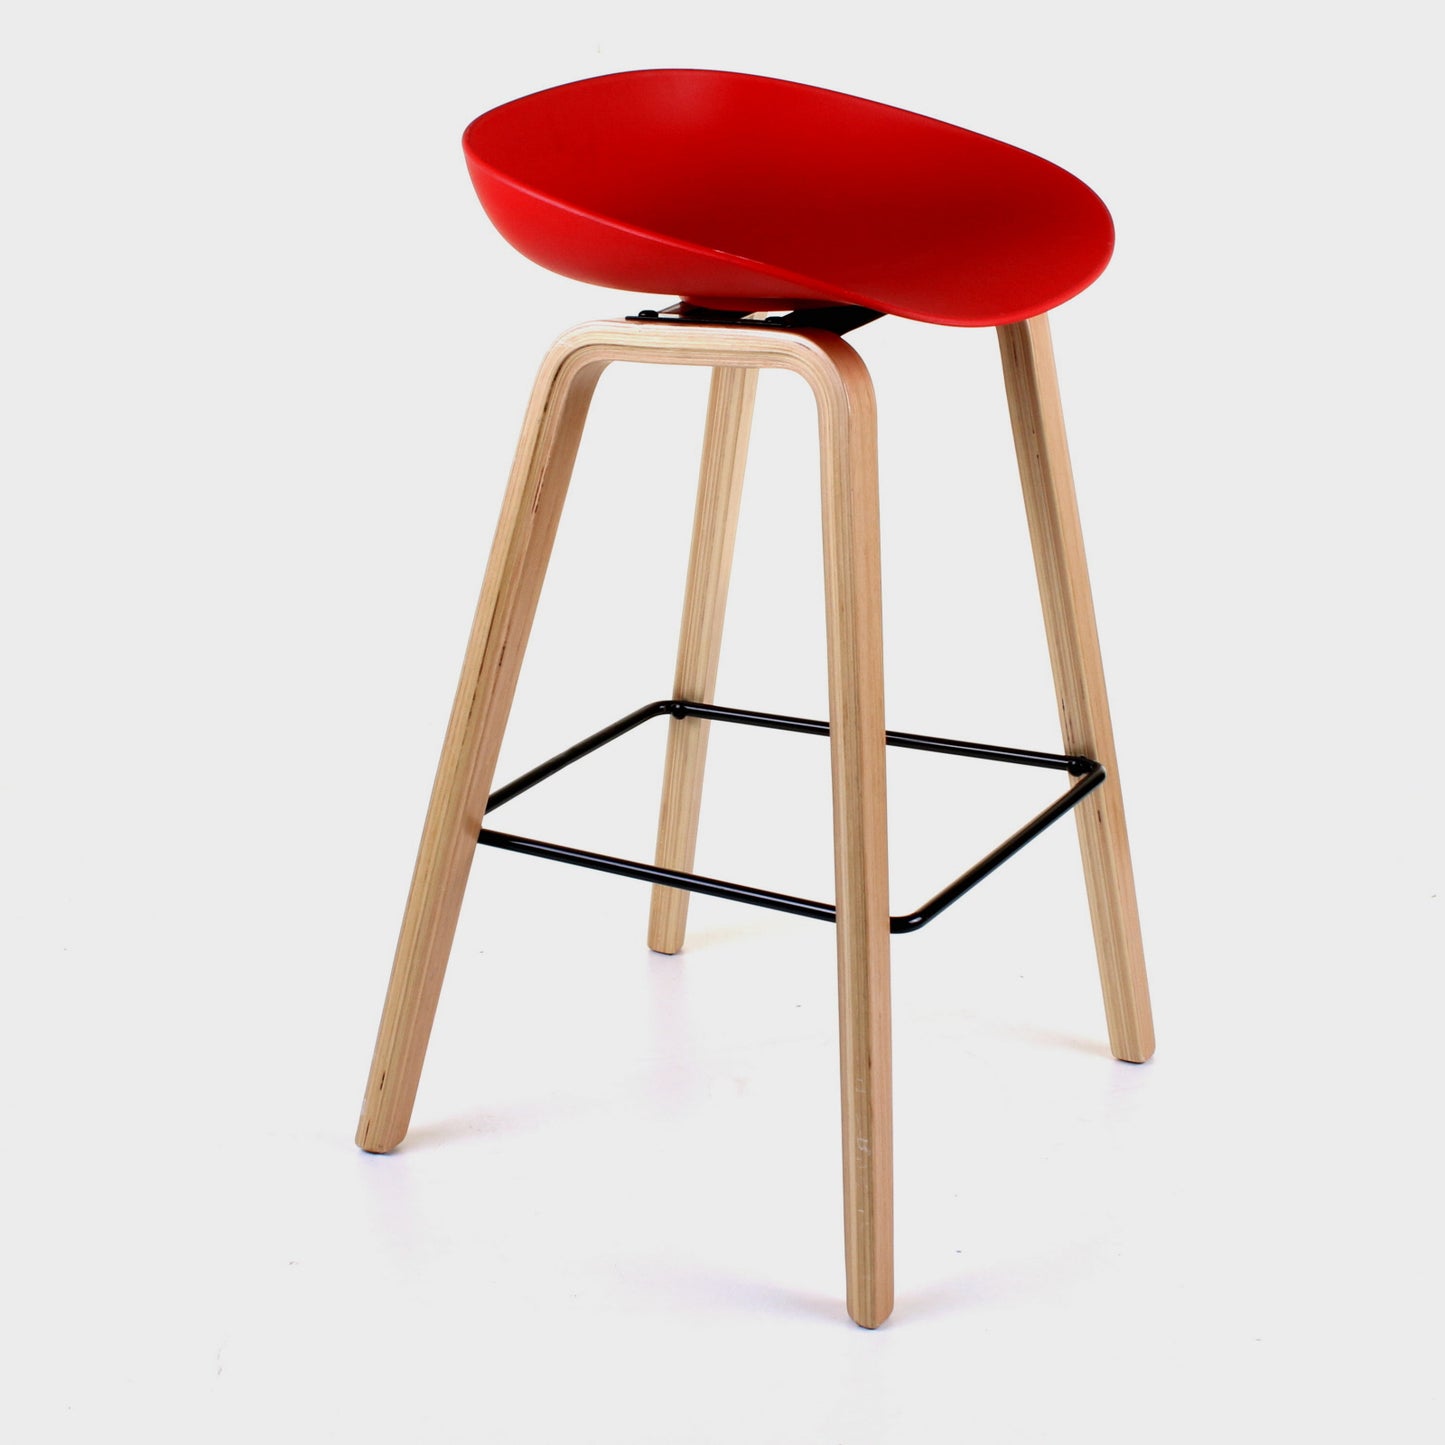 Benevento Bar Stool - Red - Set of 2